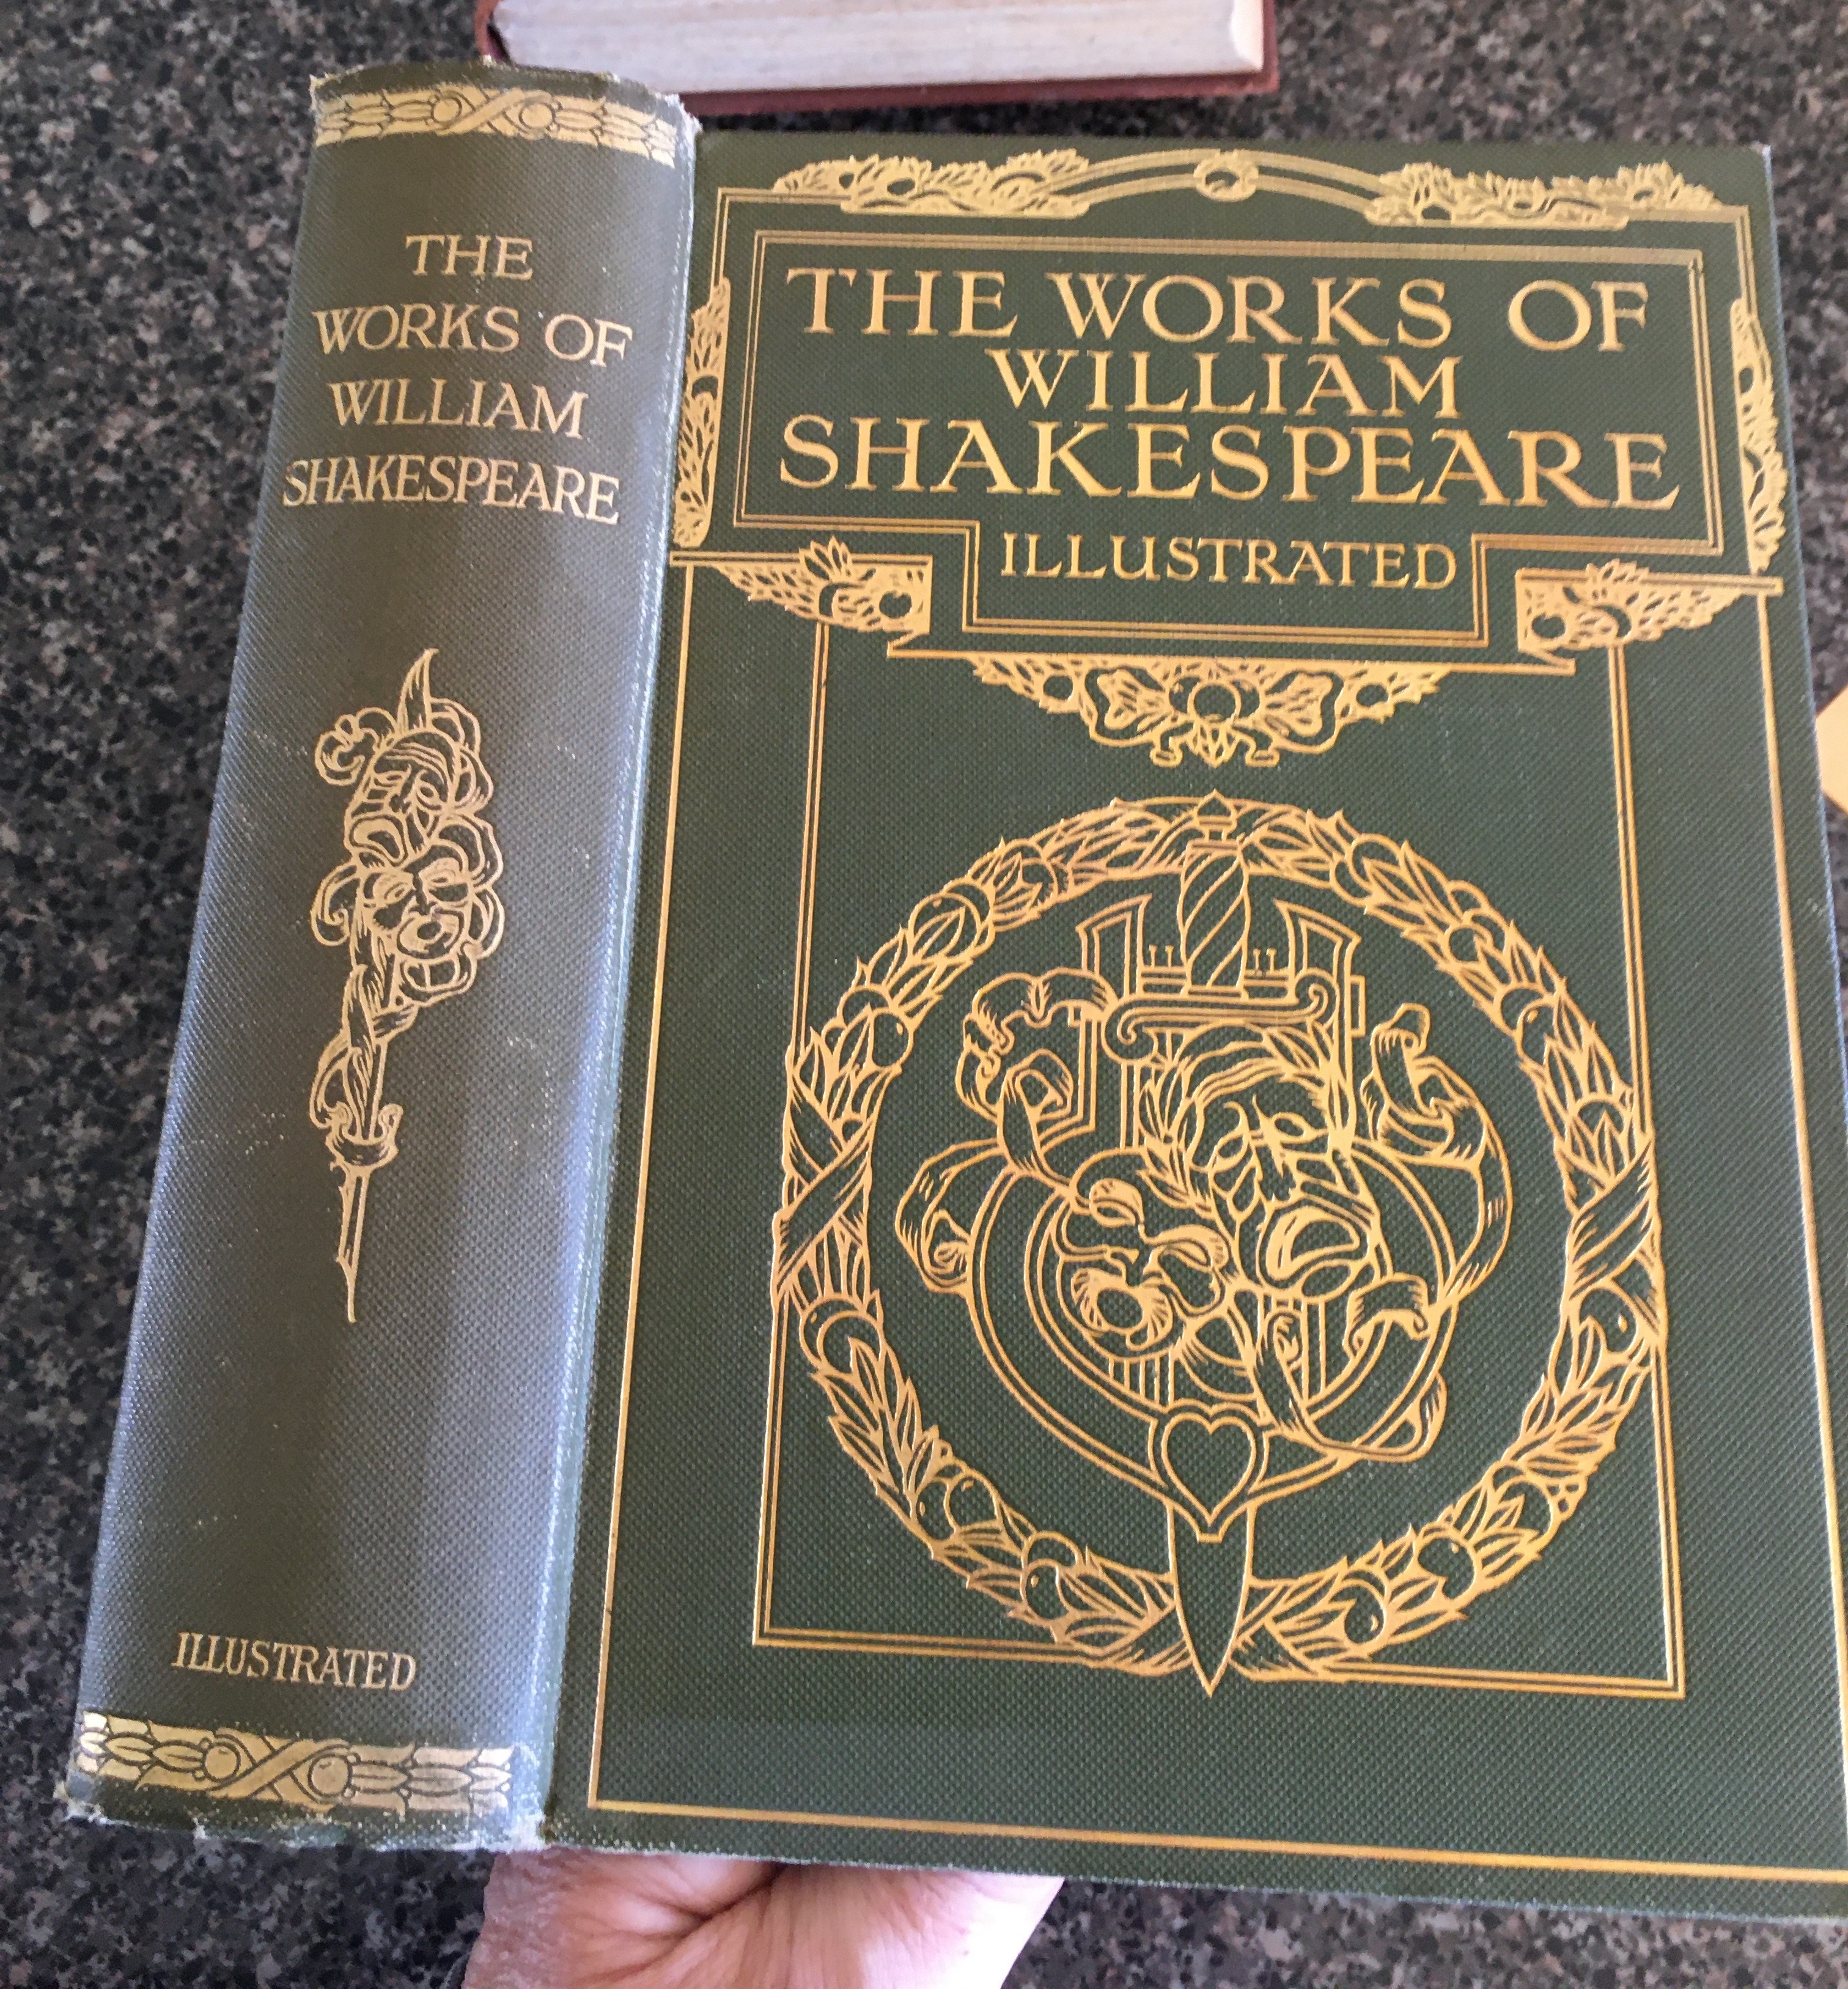 Villano asqueroso Médico THE WORKS of WILLIAM SHAKESPEARE ILLUSTRATED. THE SAVOY EDITION by  SHAKESPEARE, WILLIAM: Very Good + Decorative Cloth Presumed FIRST EDITION |  Come See Books Livres